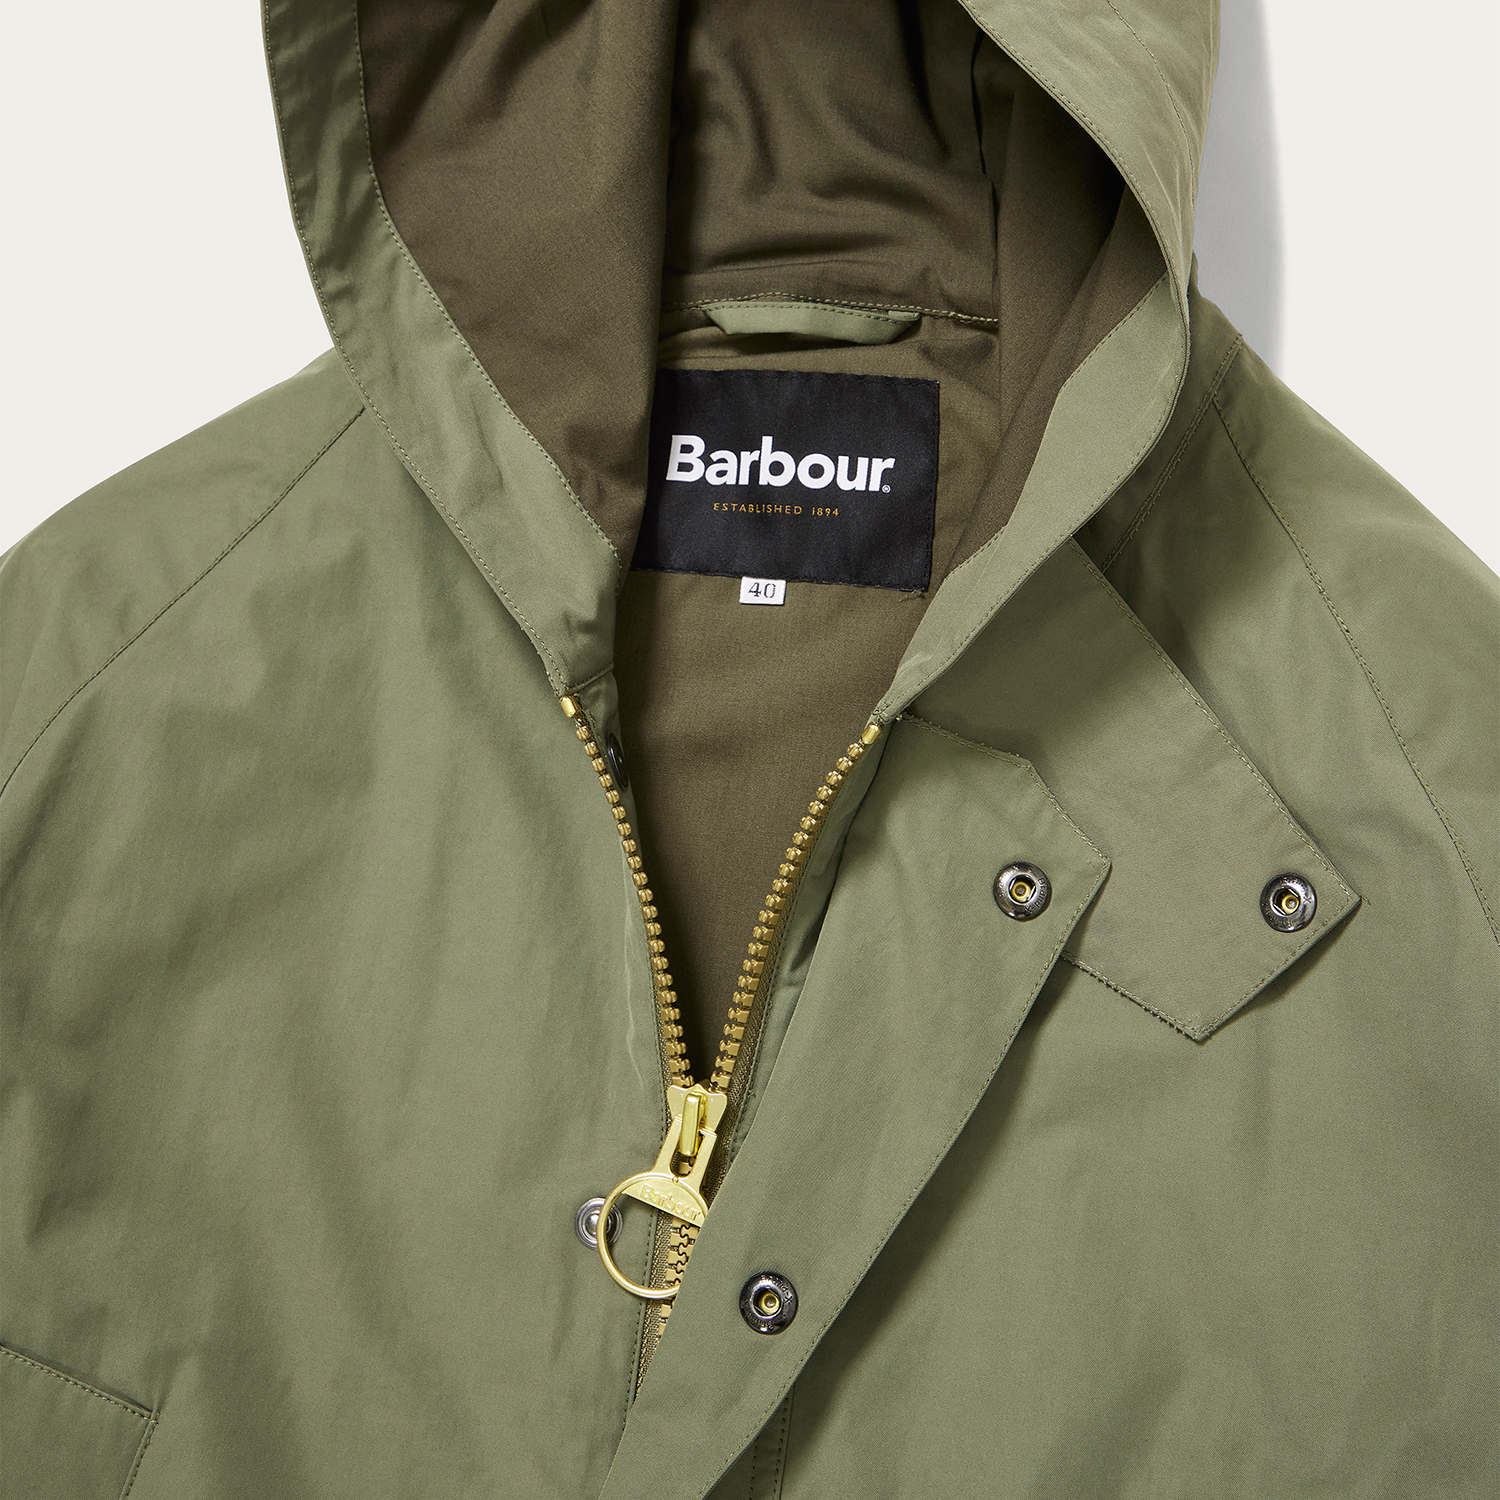 Barbour for UNITED ARROWSの最新作が2月10日に発売